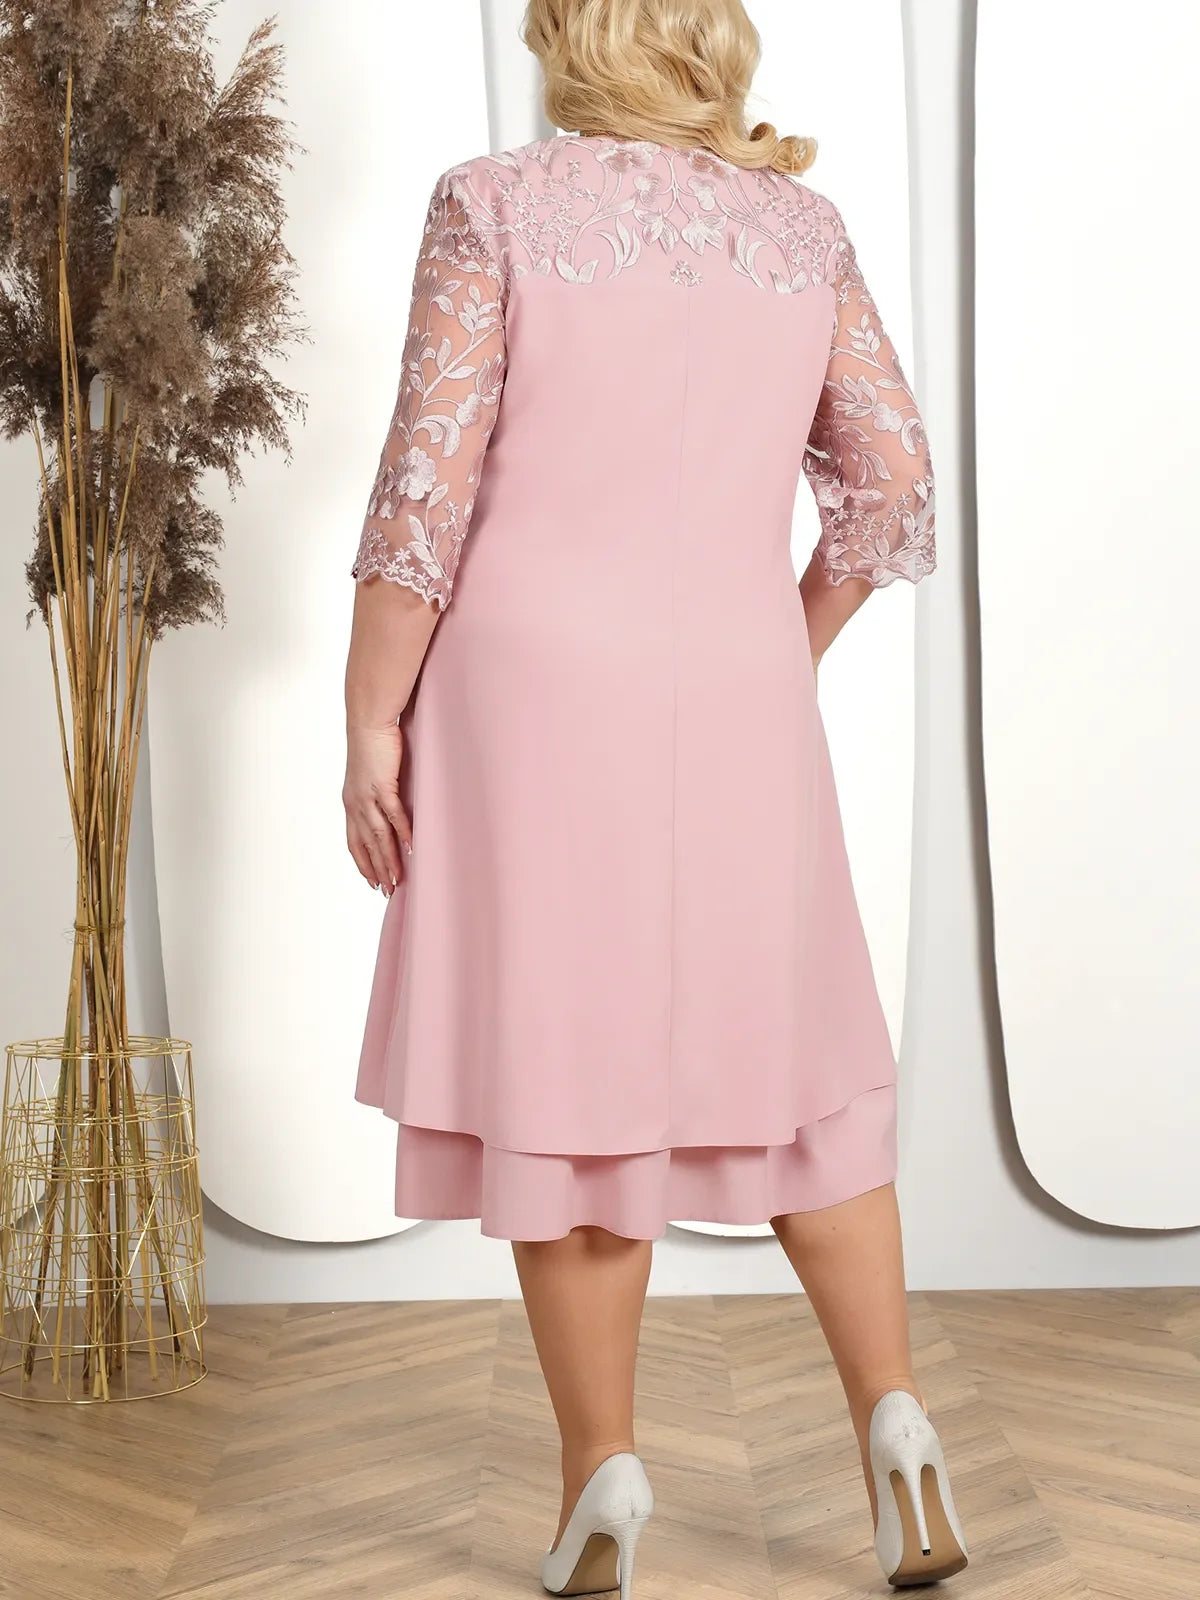 Plus Size Dress Elegant Embroidery Chiffon Prom Formal Party Dresses for Chubby Women Loose Ladies Church Dress